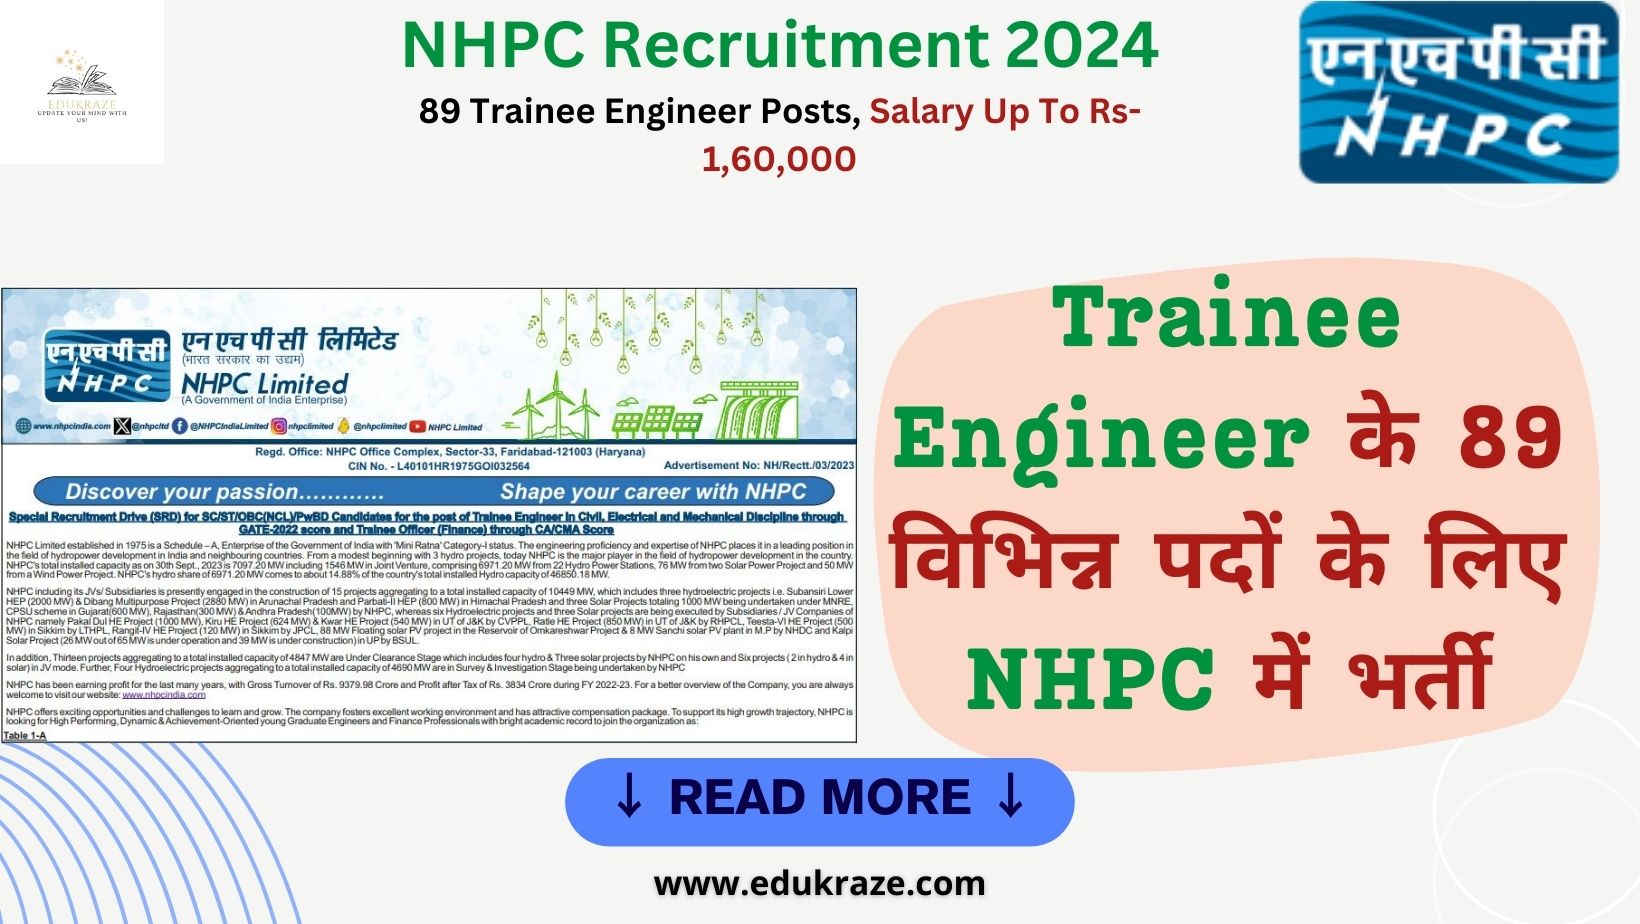 NHPC Recruitment 2024 Out for 89 Trainee Engineer Posts